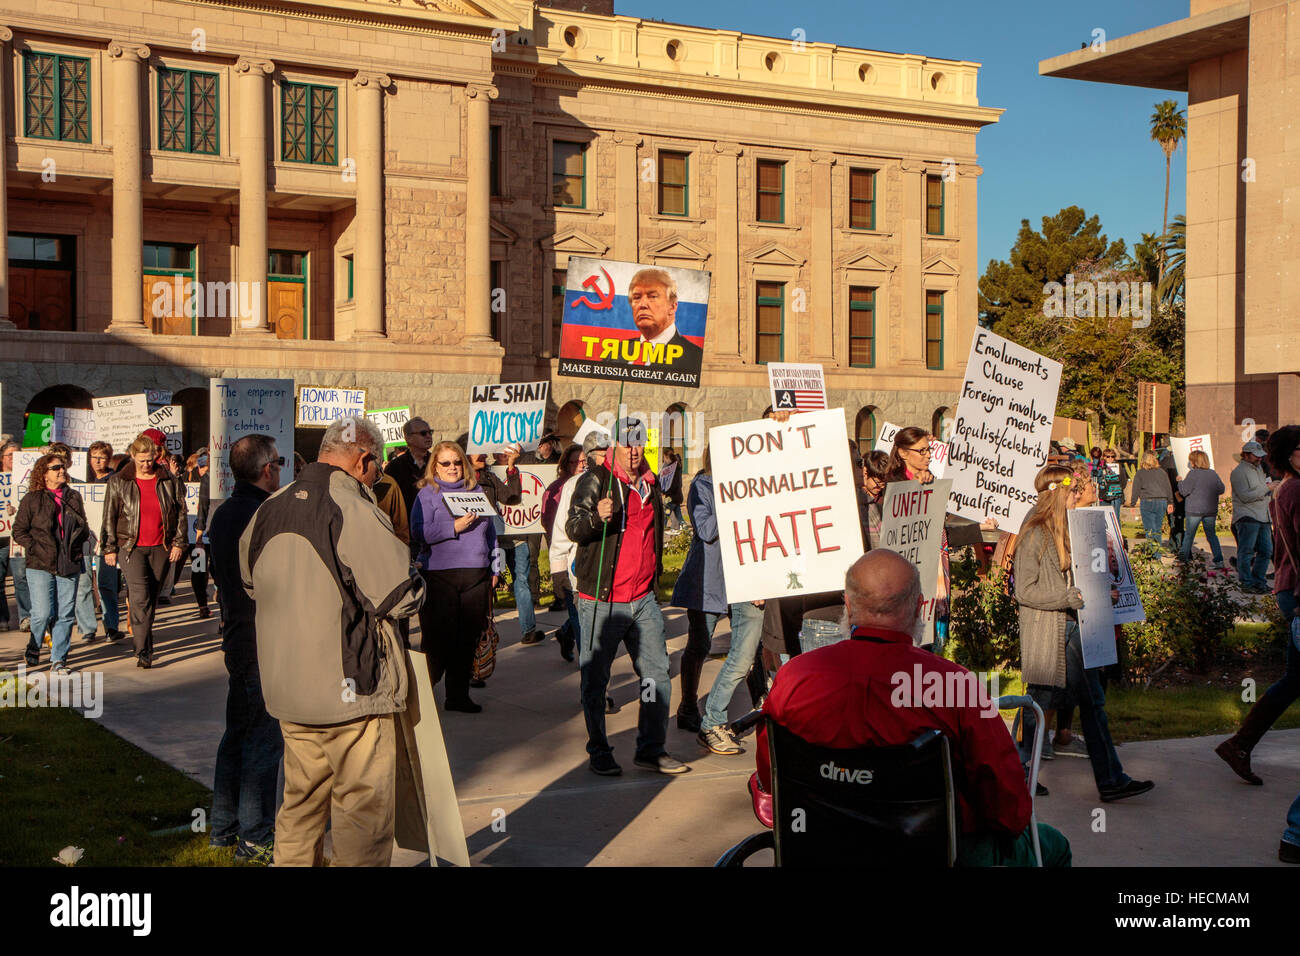 Phoenix, Arizona, USA. 19th December, 2016. Protesters rally outside of the Arizona State Capitol before the electoral college vote. Despite the protest, all eleven electors cast their vote in accordance with the popular vote of Arizona. © Jennifer Mack/Alamy Live News Stock Photo